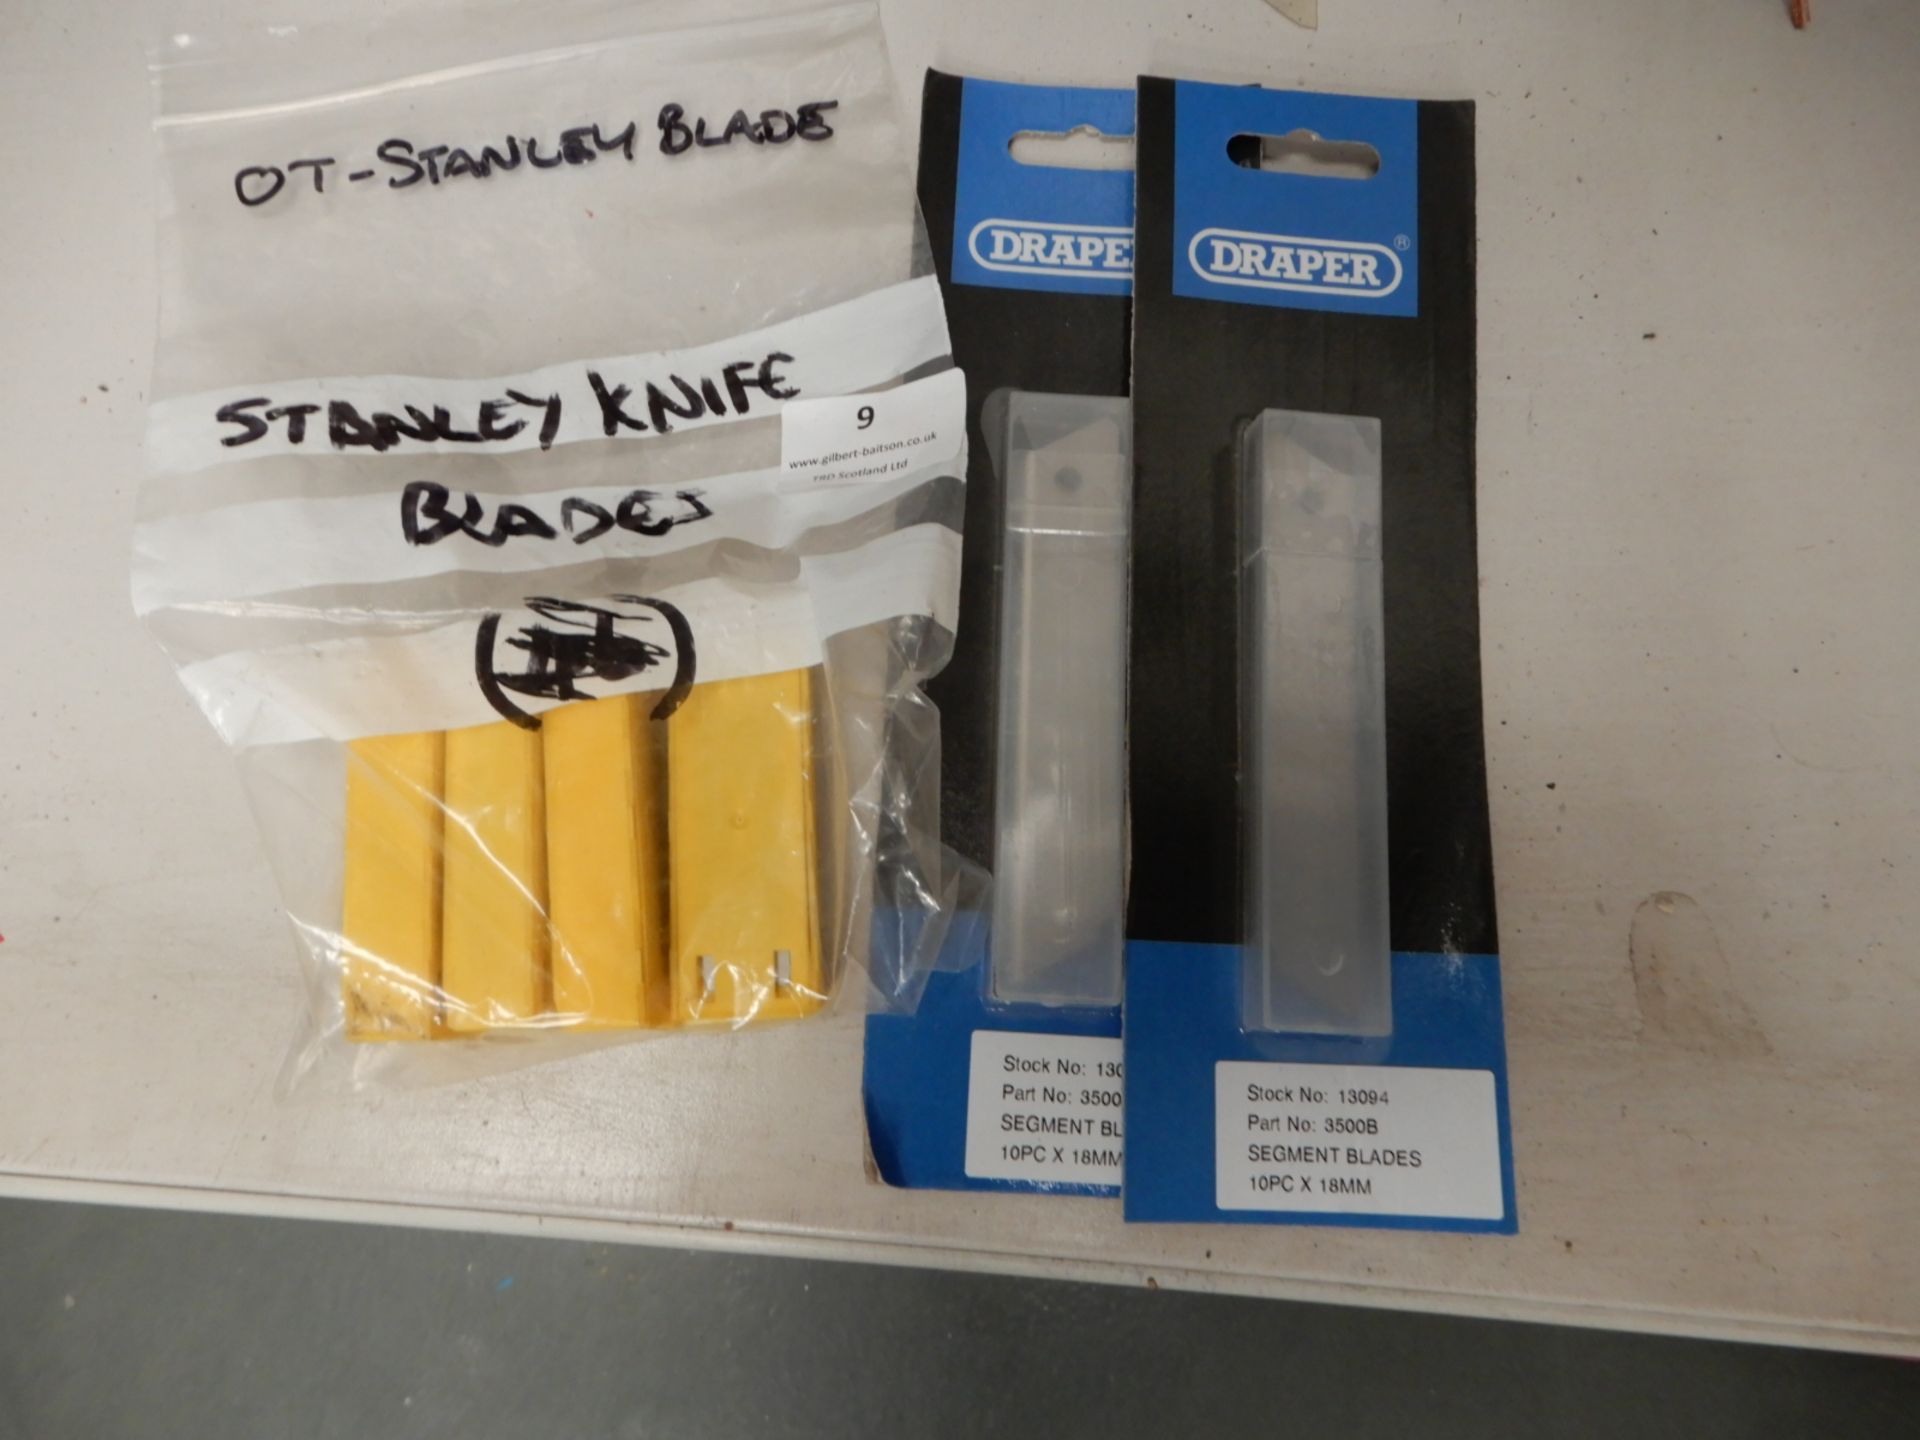 *Assorted Stanley Knife Blades and Draper Blades